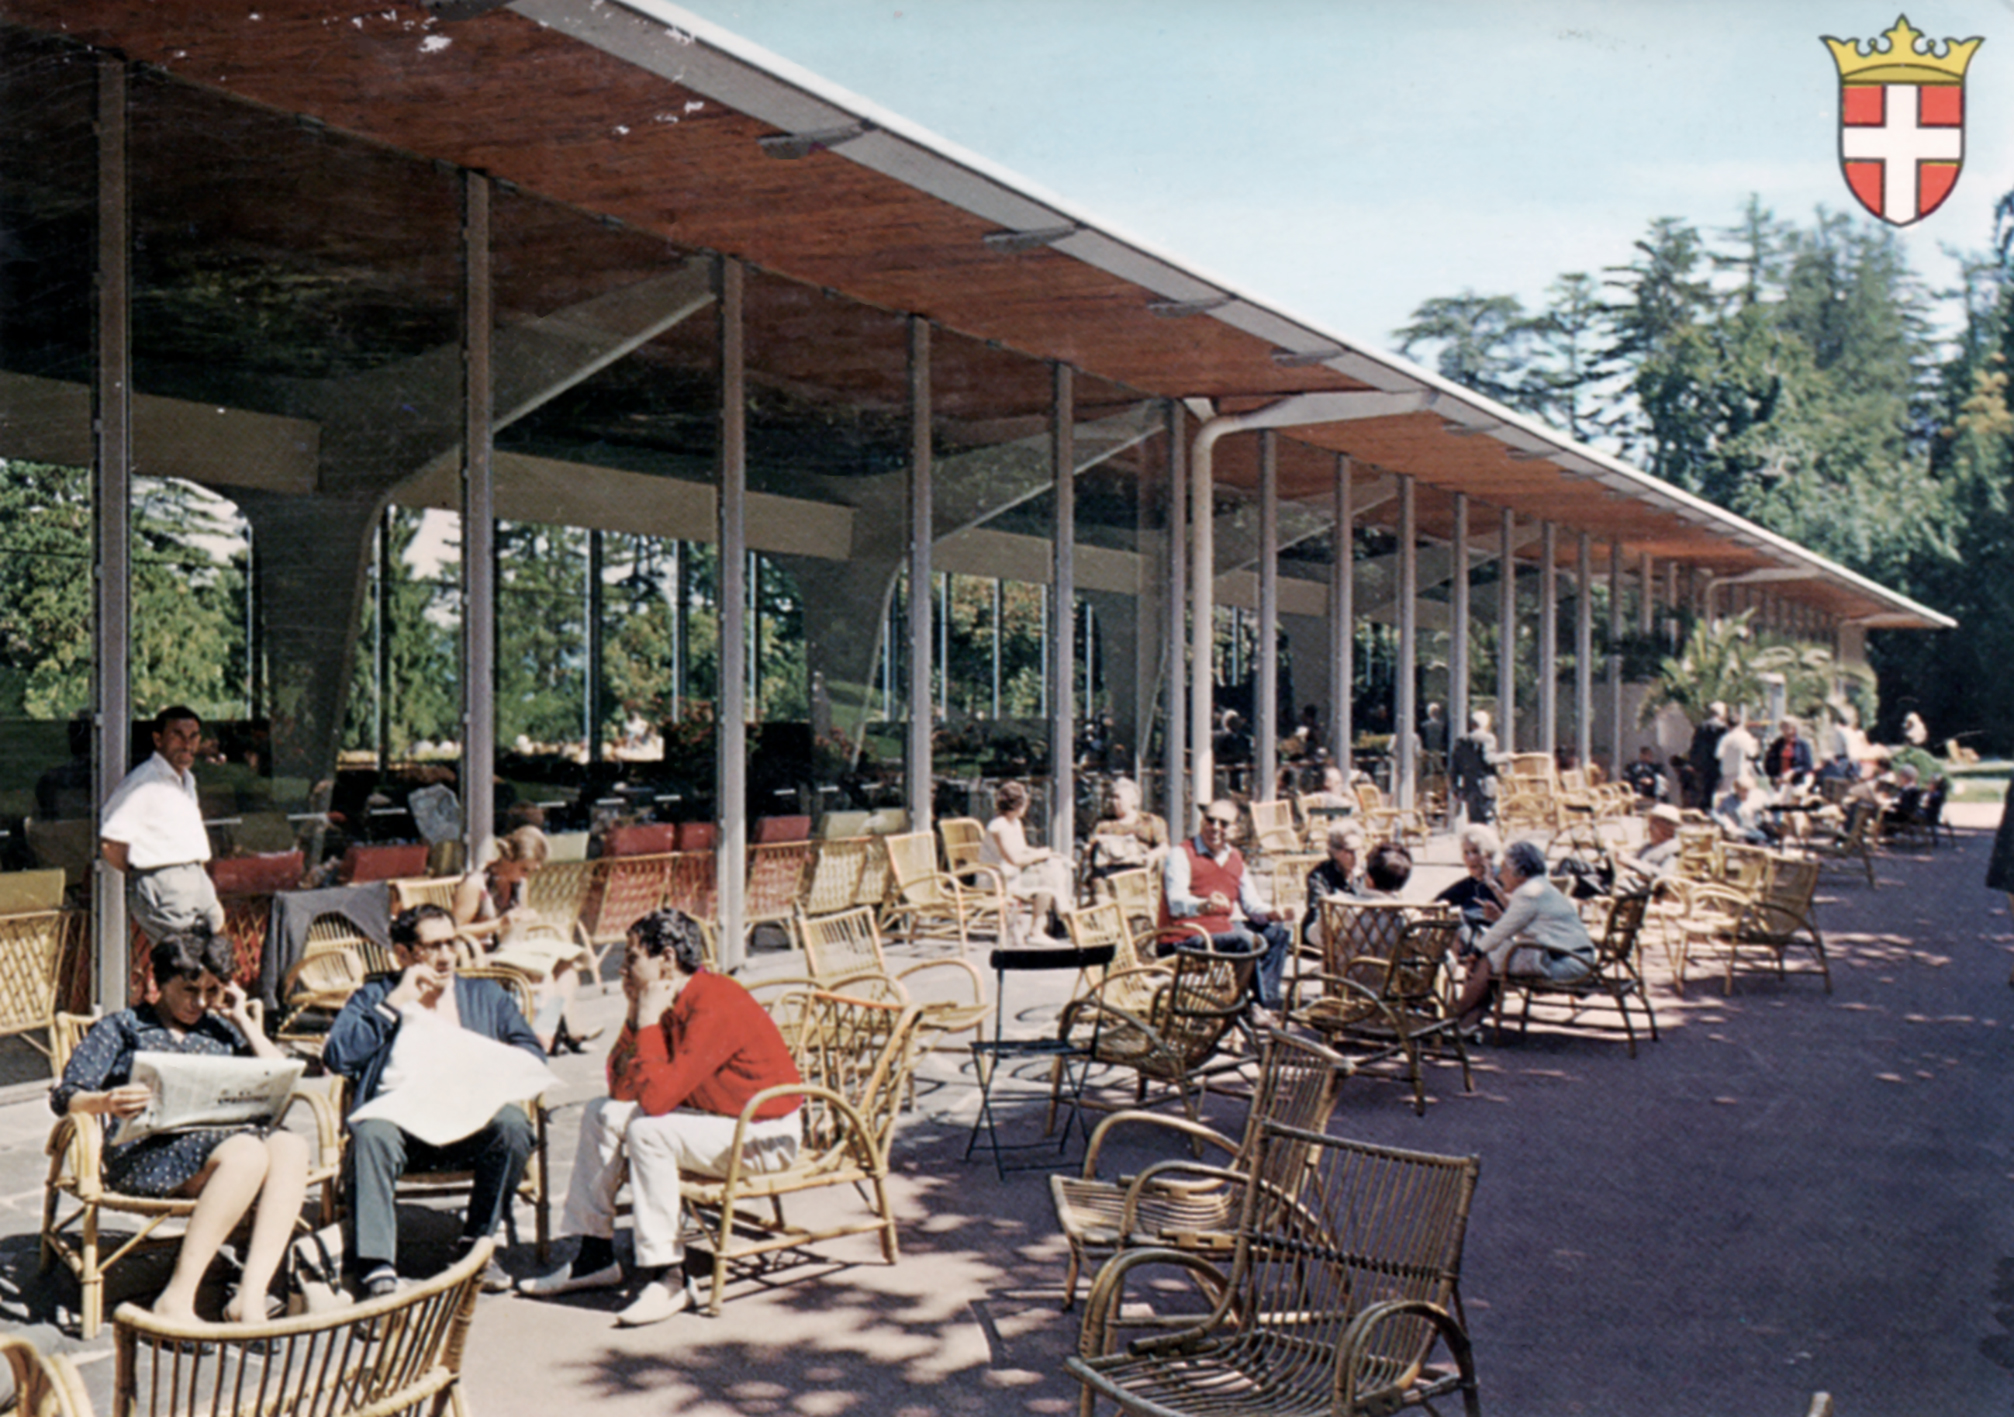 Cachat mineral water pump room, Évian, 1956 (Jean Prouvé, with architect M. Novarina, engineer S. Ketoff).